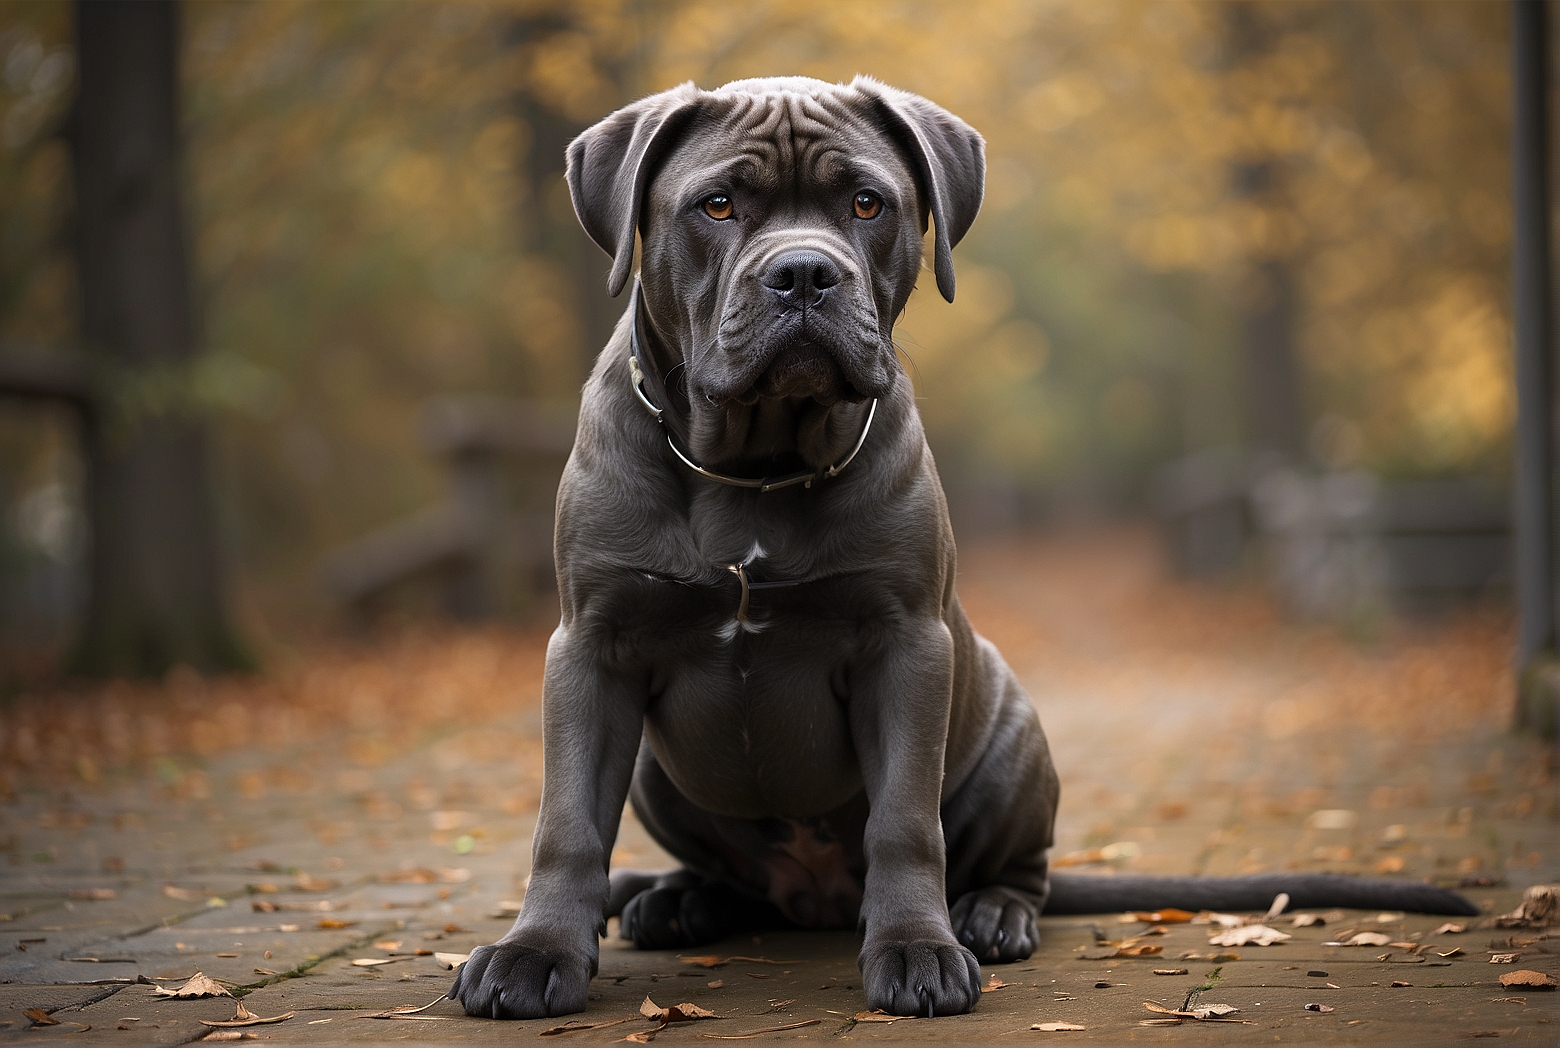 Why is my Cane Corso so skinny?